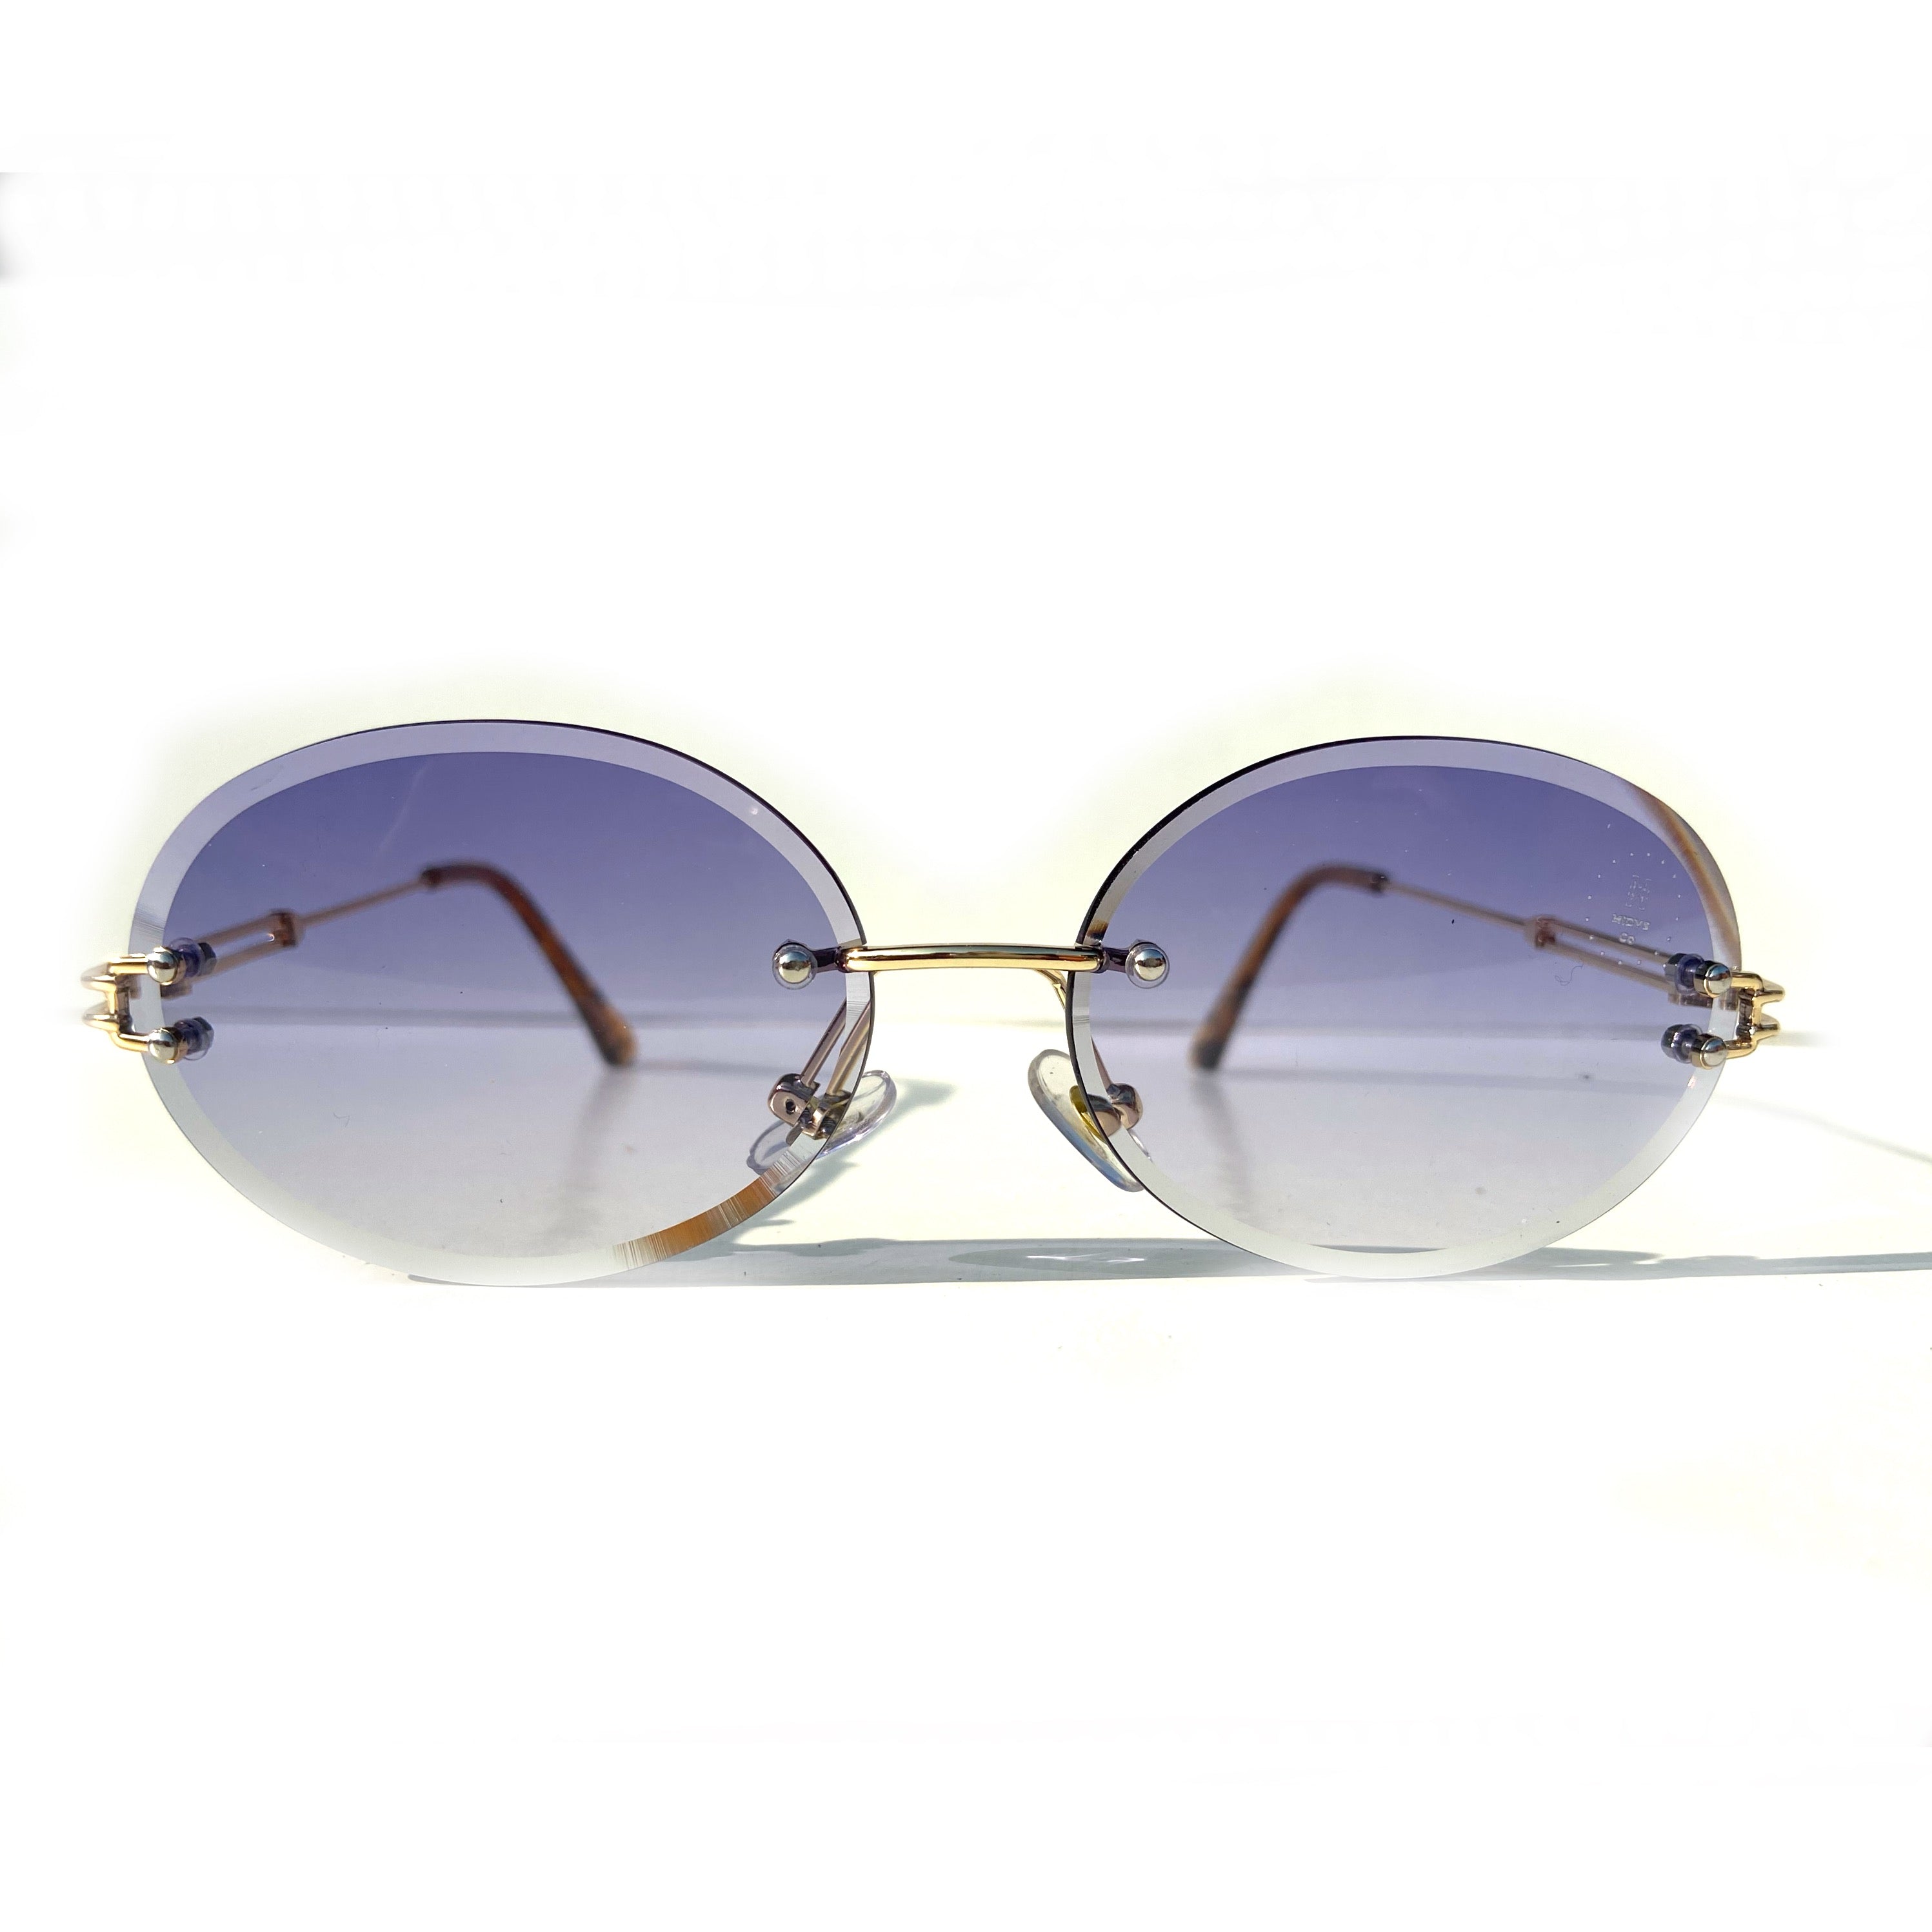 The Nore Shades Clear Blue / Gold